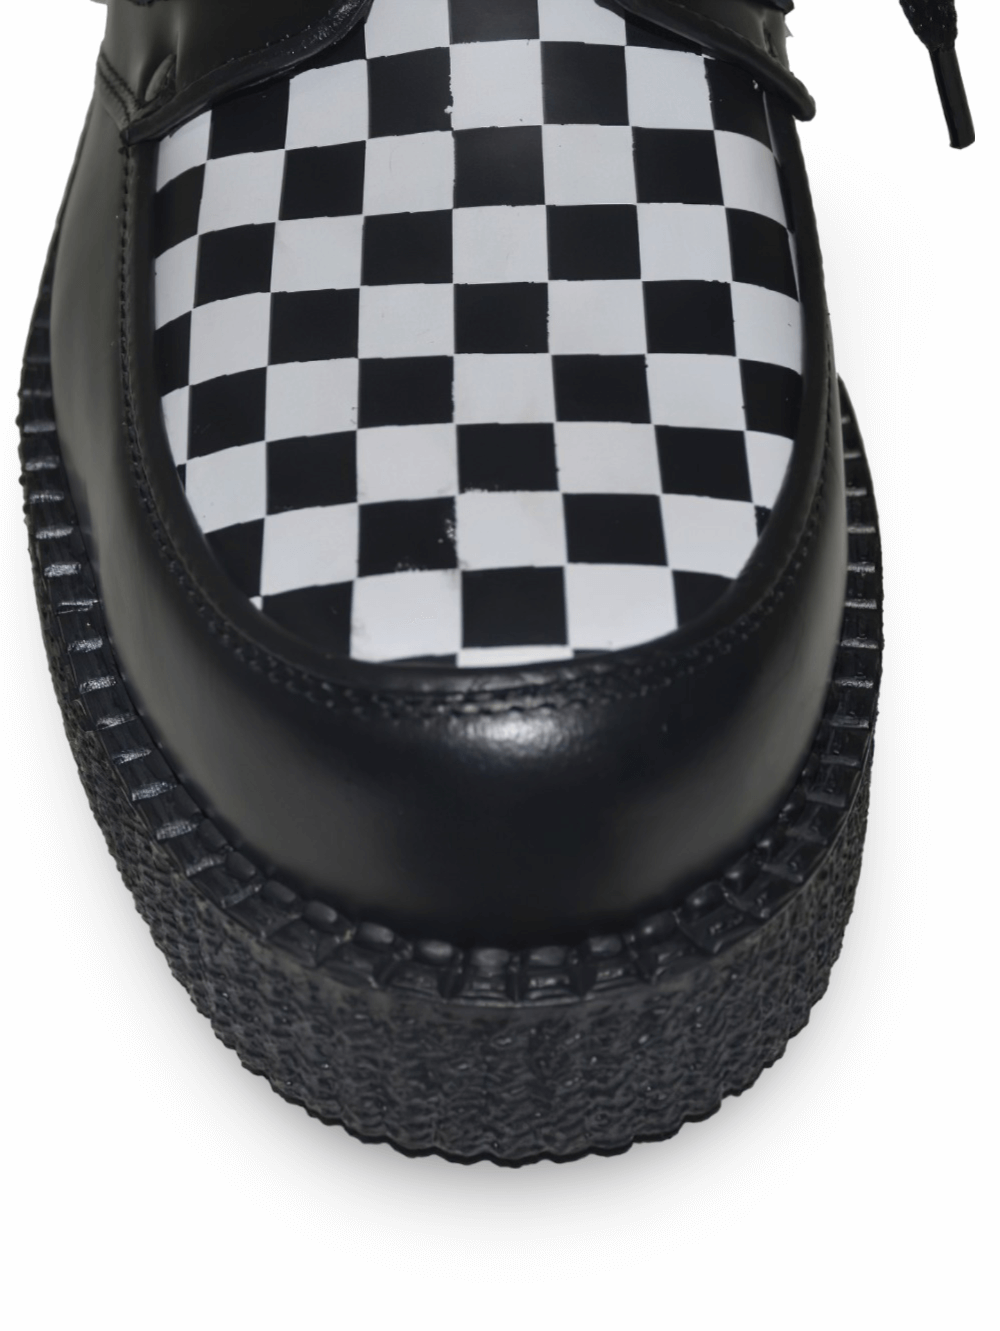 Checkerwork Black And White Creepers With Lace-Up